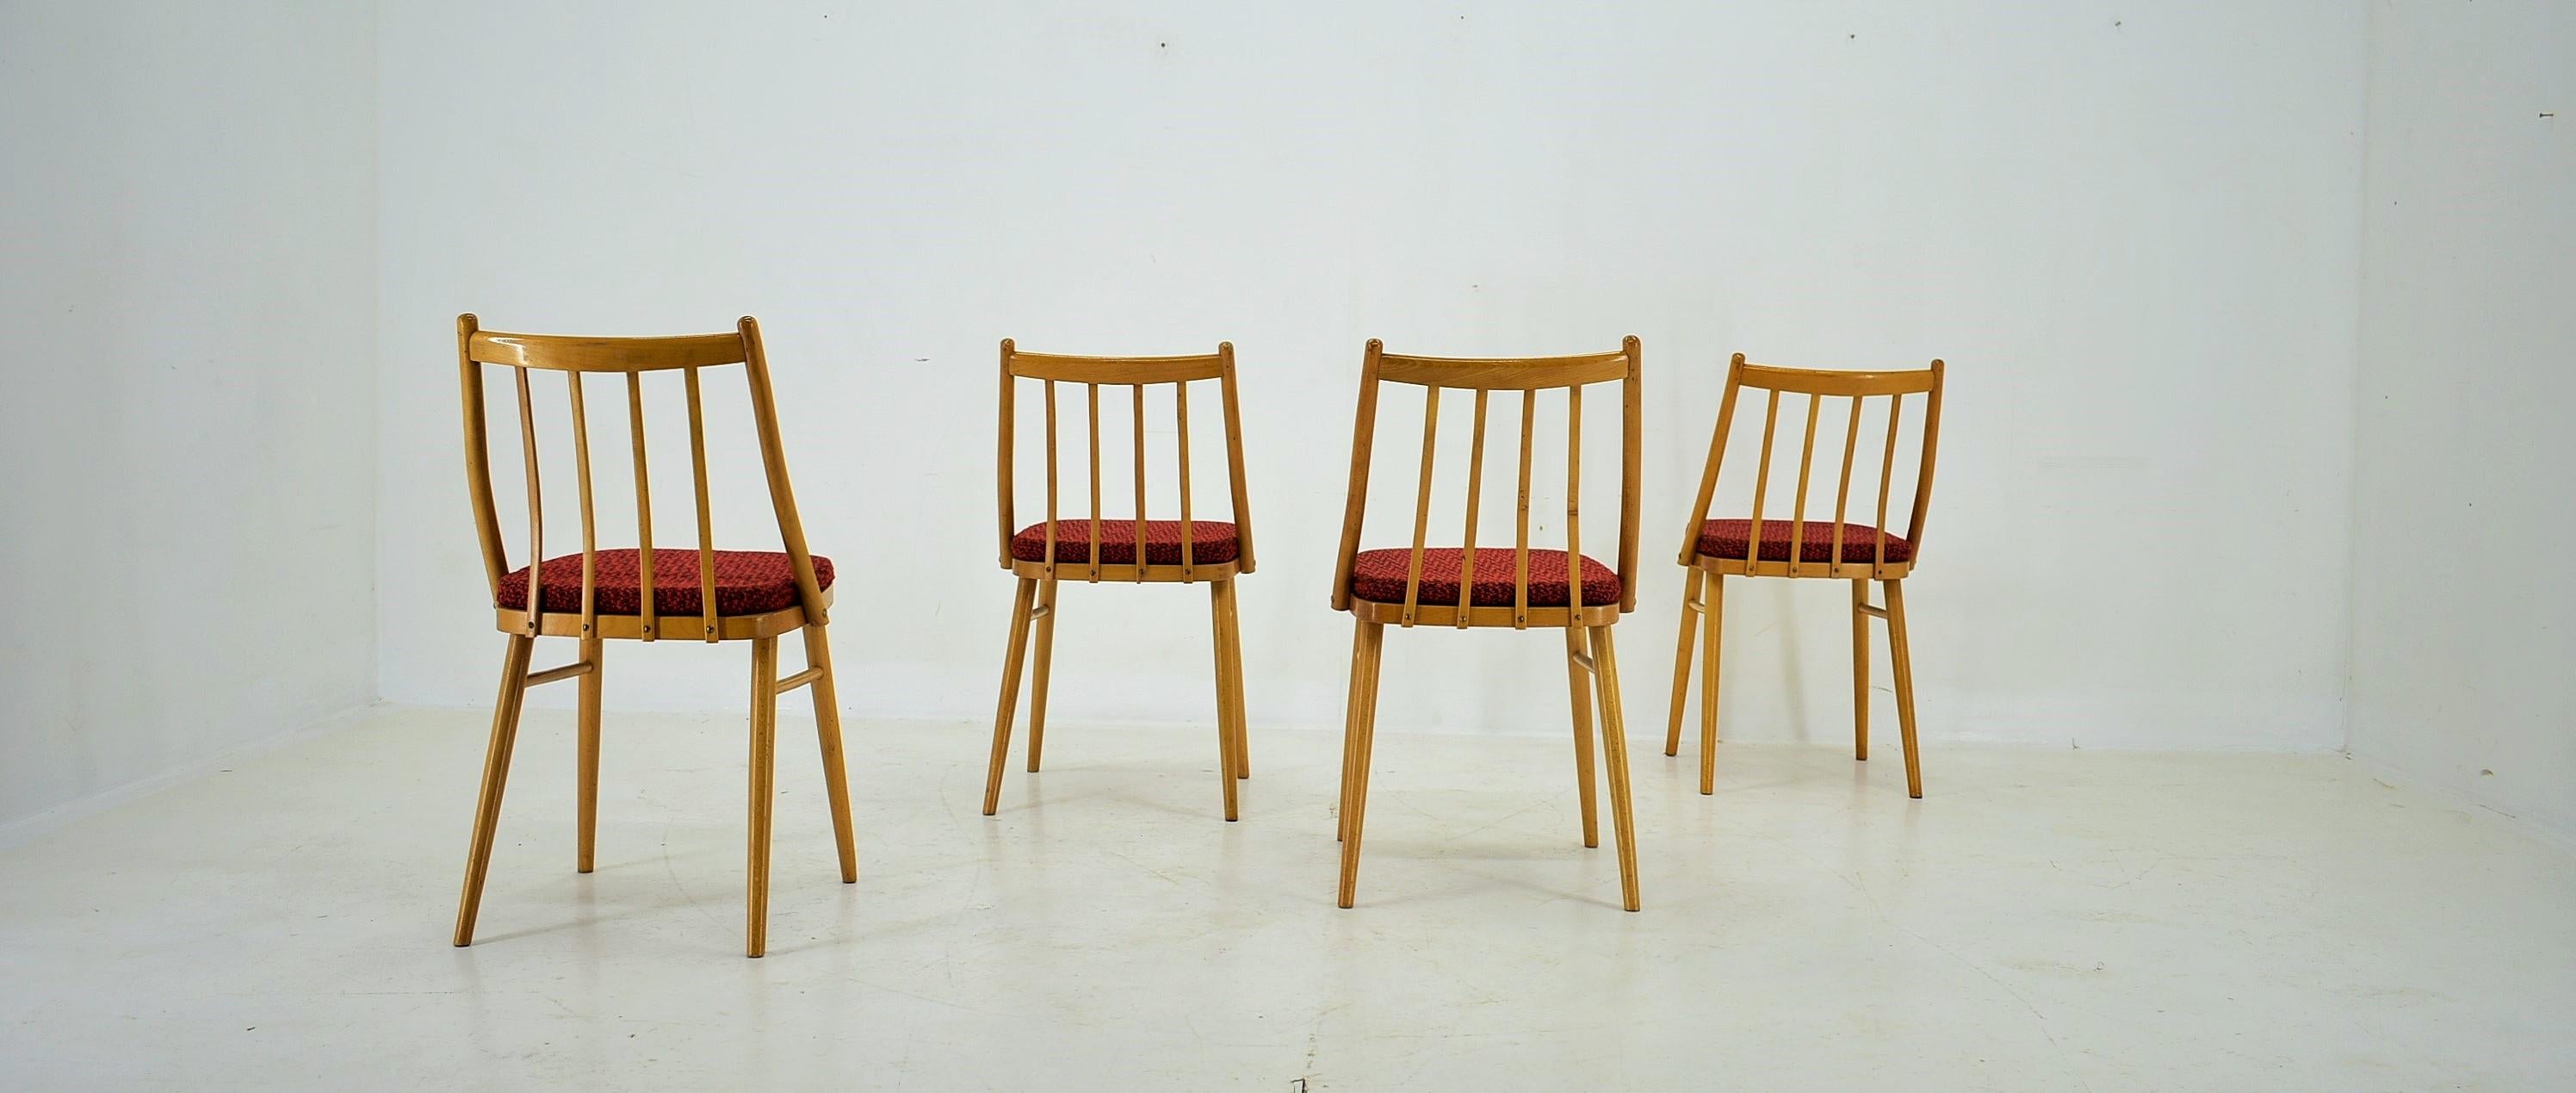 1960s Antonin Suman Beech Dining Chairs, Set of 4 For Sale 2